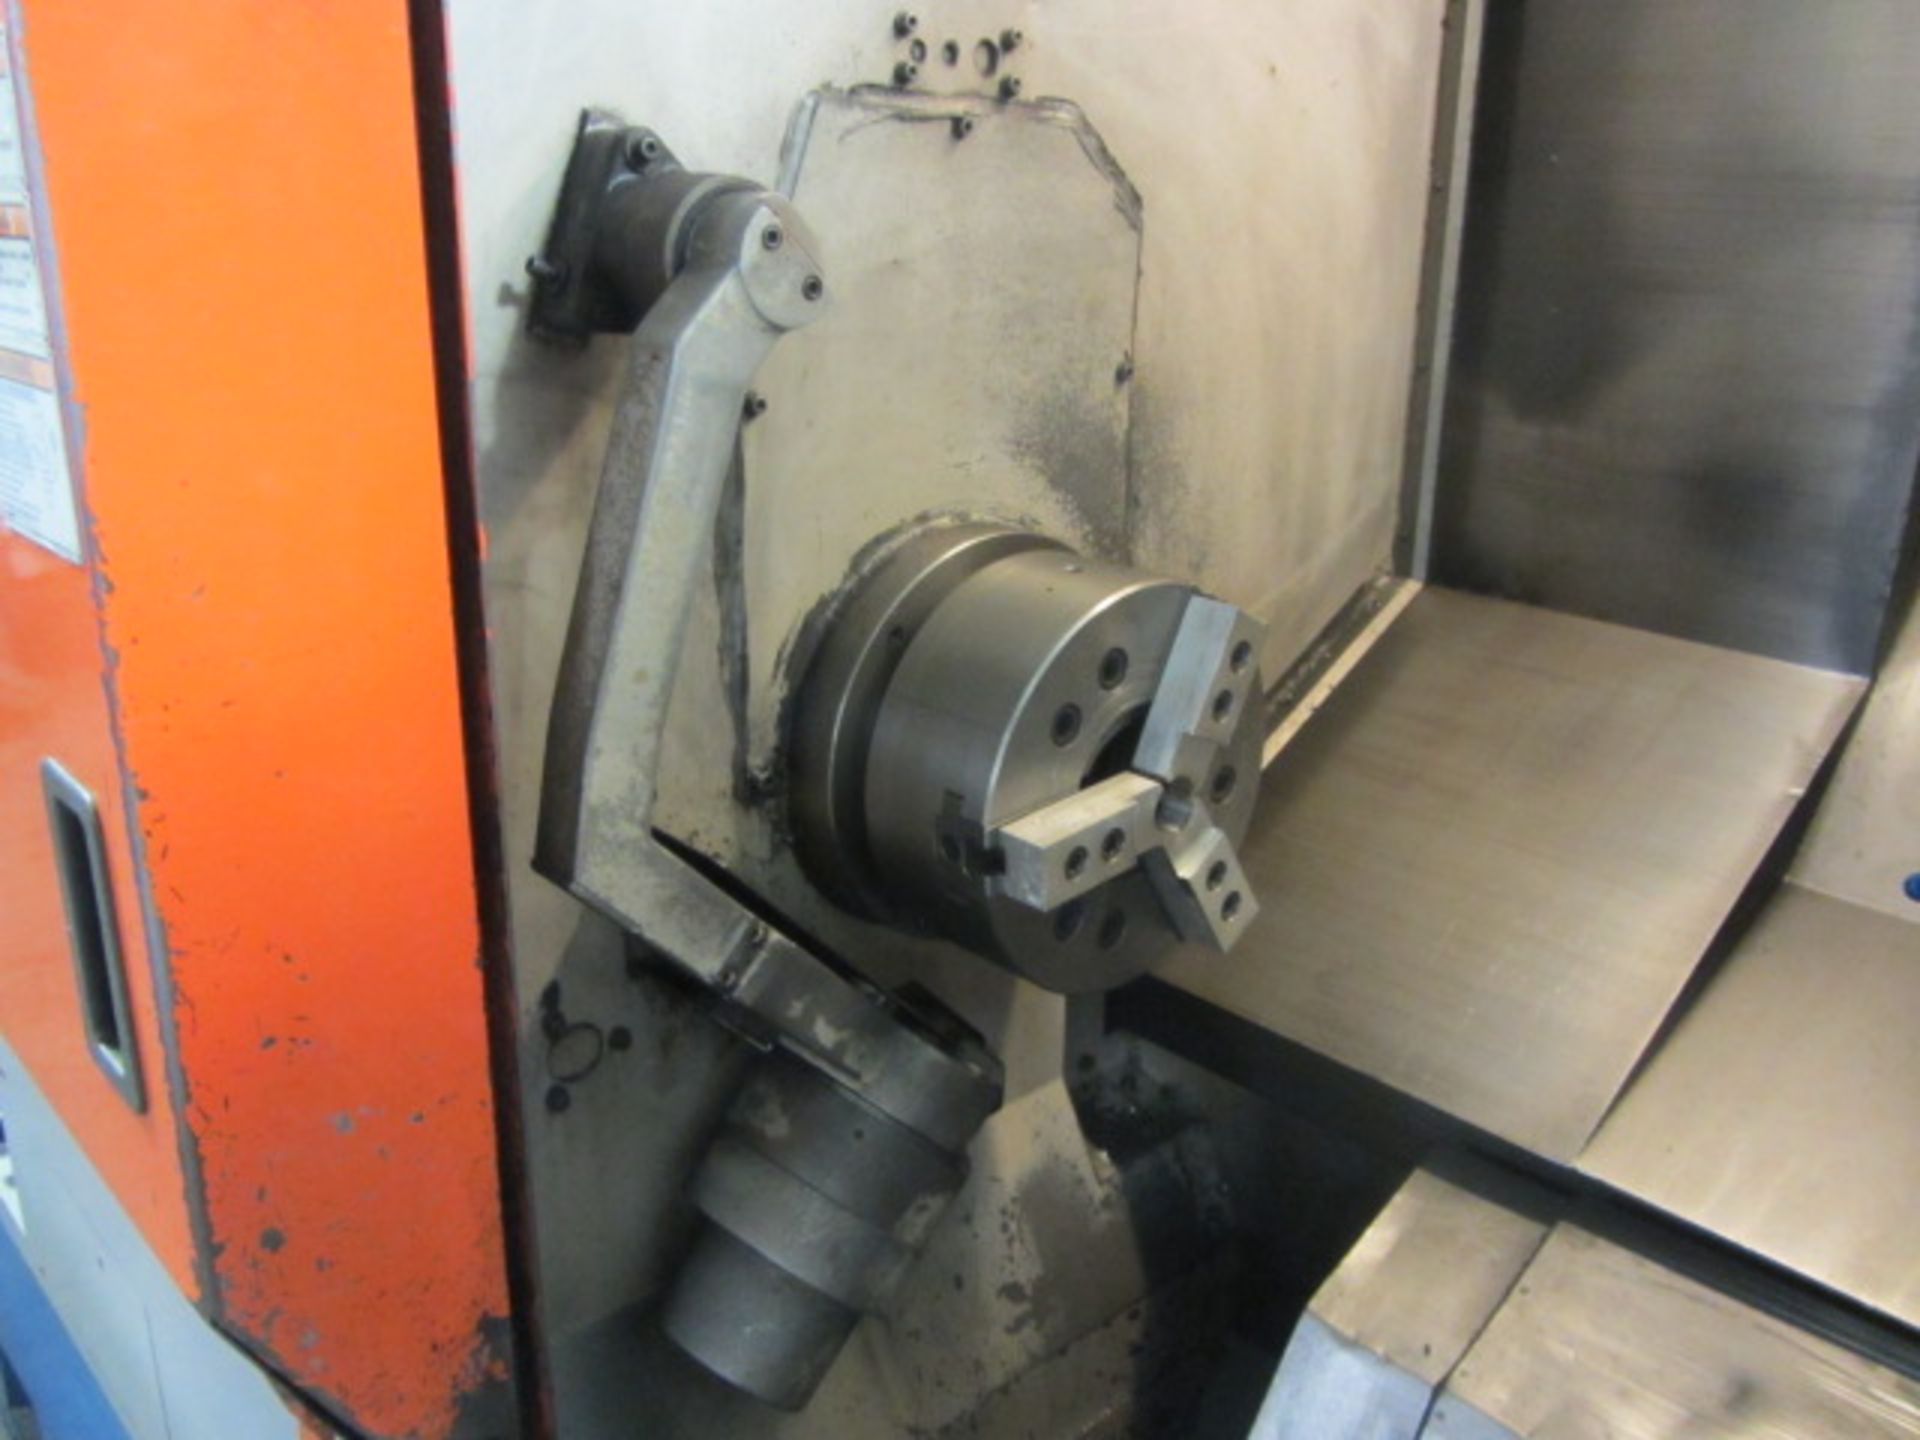 Mazak Model Super Quick Turn 28 2-Axis CNC Turning Center with 20.08'' Swing Over Bed x 40'' - Image 3 of 7